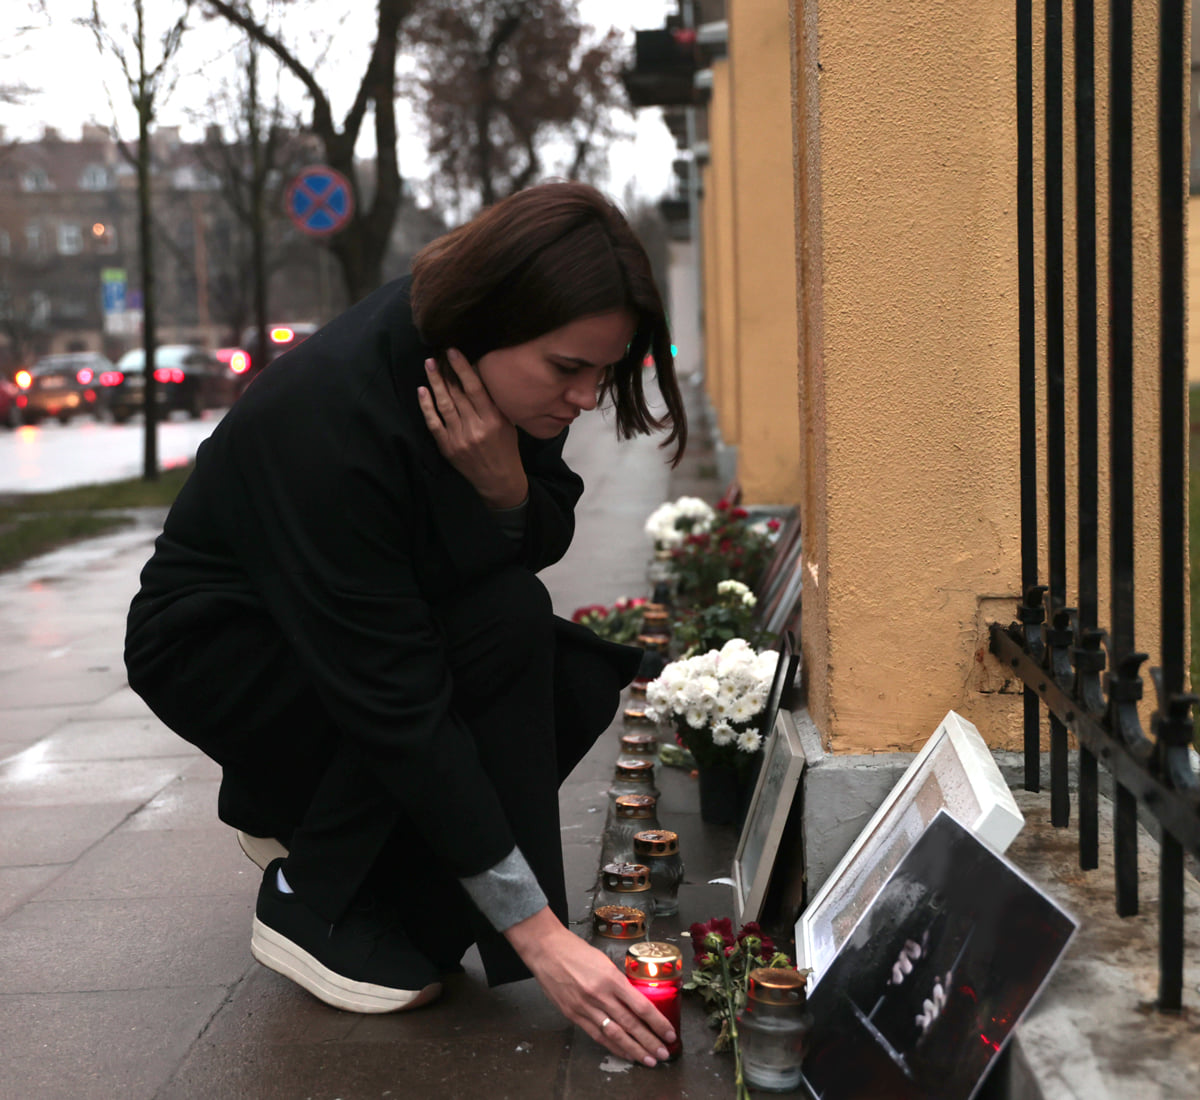 In our history, April 11 will always be remembered as the day of the Minsk metro attack in 2011. A tragic day that saw 15 lives lost and 400 injured. Many questions about this day still remain unanswered by the regime. We finally need the full truth about this horrible attack.